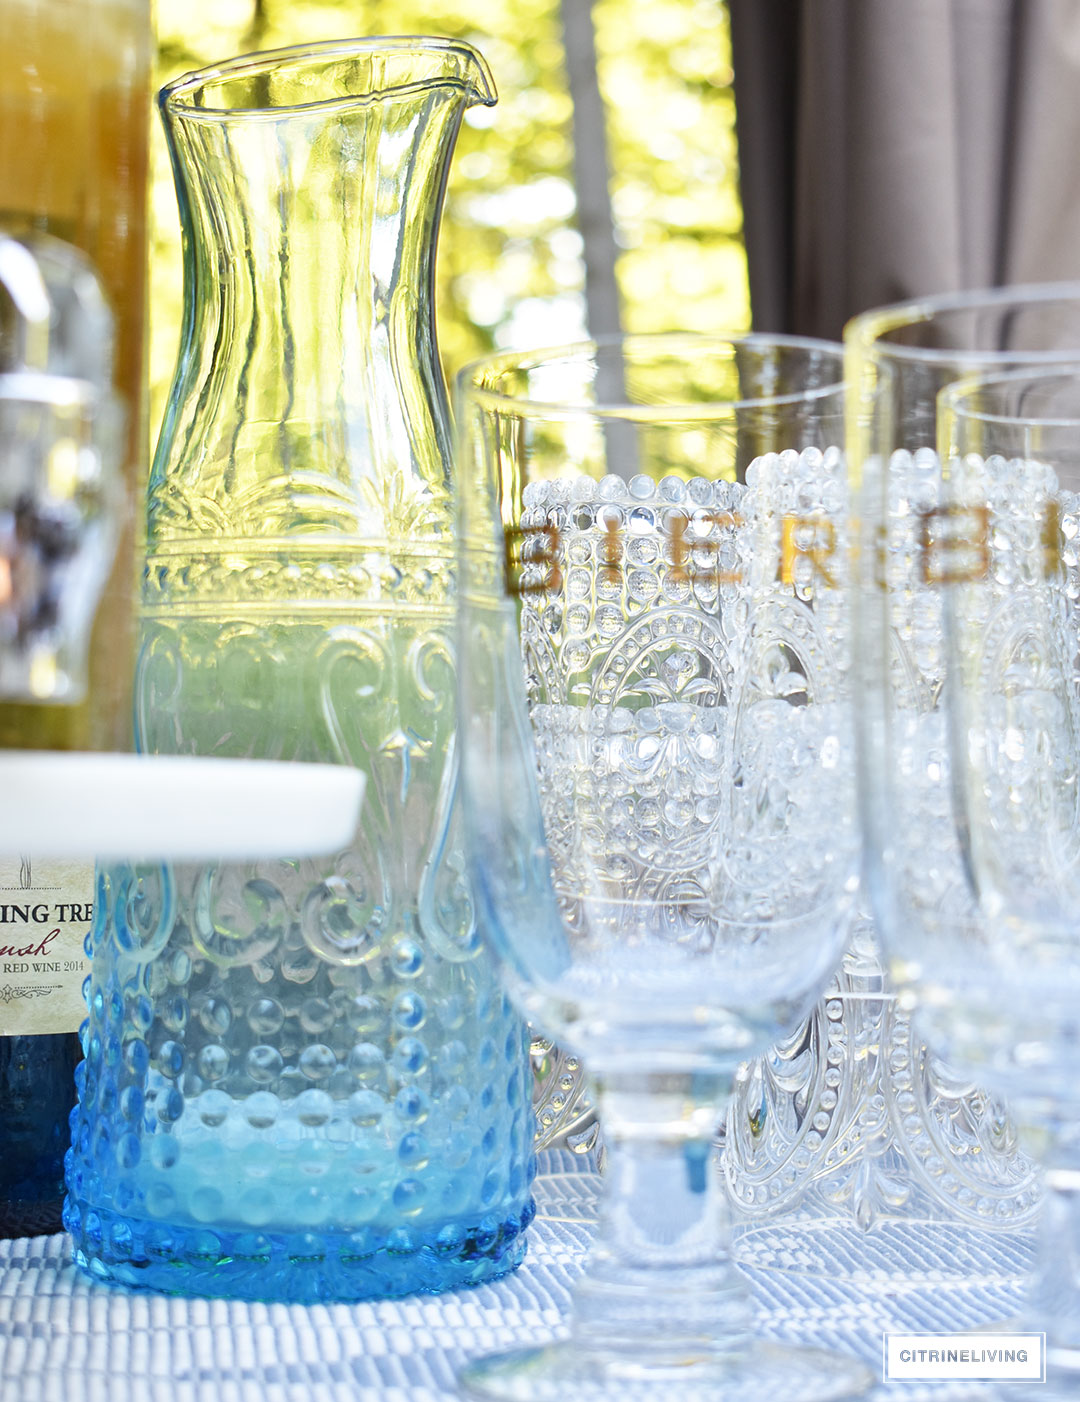 Use an outdoor bar cart layered with vintage inspired glassware and drink dispensers for your Summer entertaining.